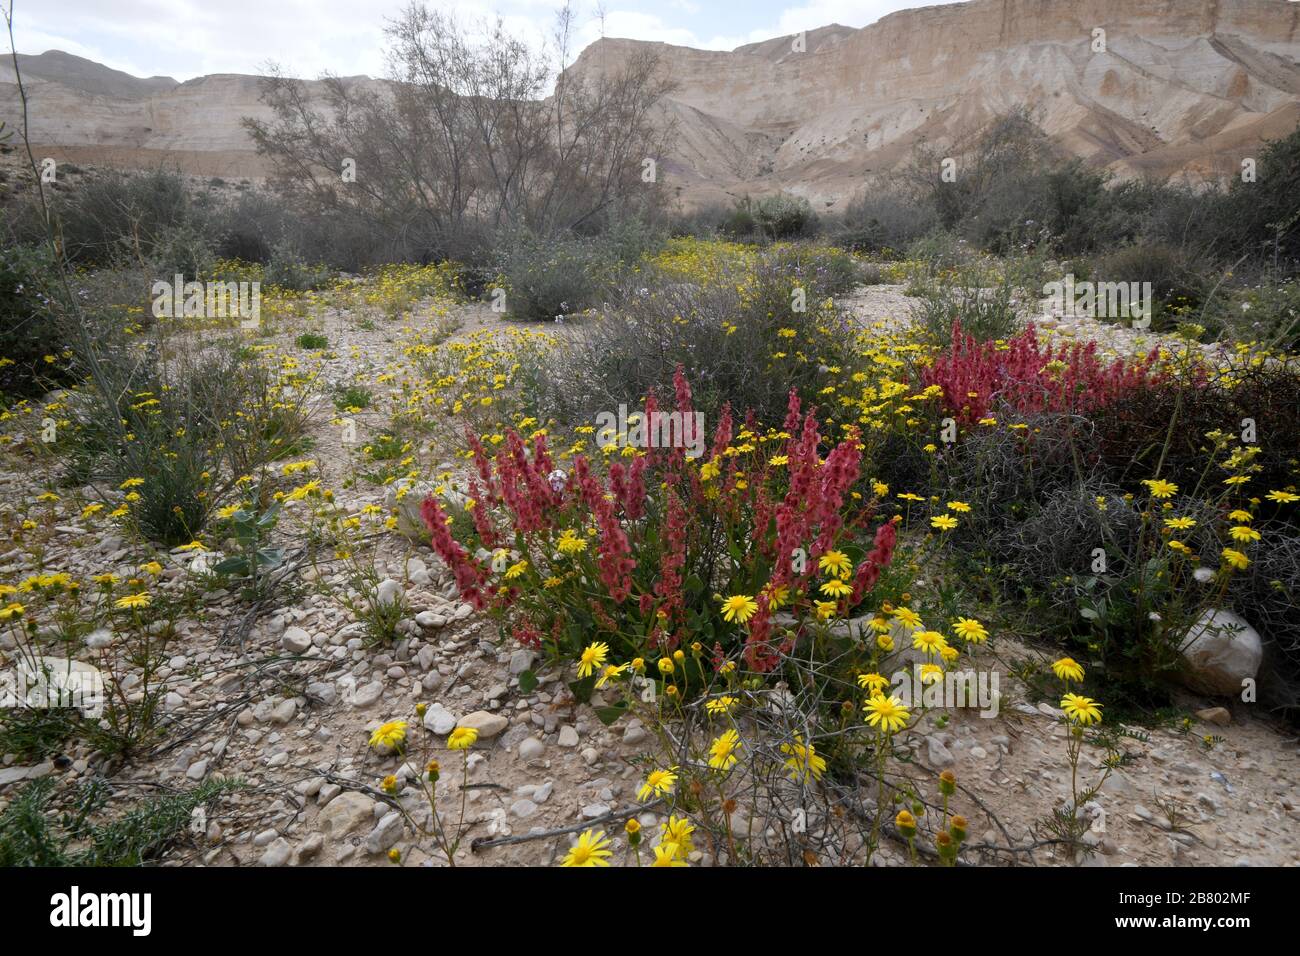 Blooming Knotweed sorrel (Rumex cyprius syn Rumex roseus). After a rare rainy season in the Negev Desert, Israel, an abundance of wildflowers sprout o Stock Photo